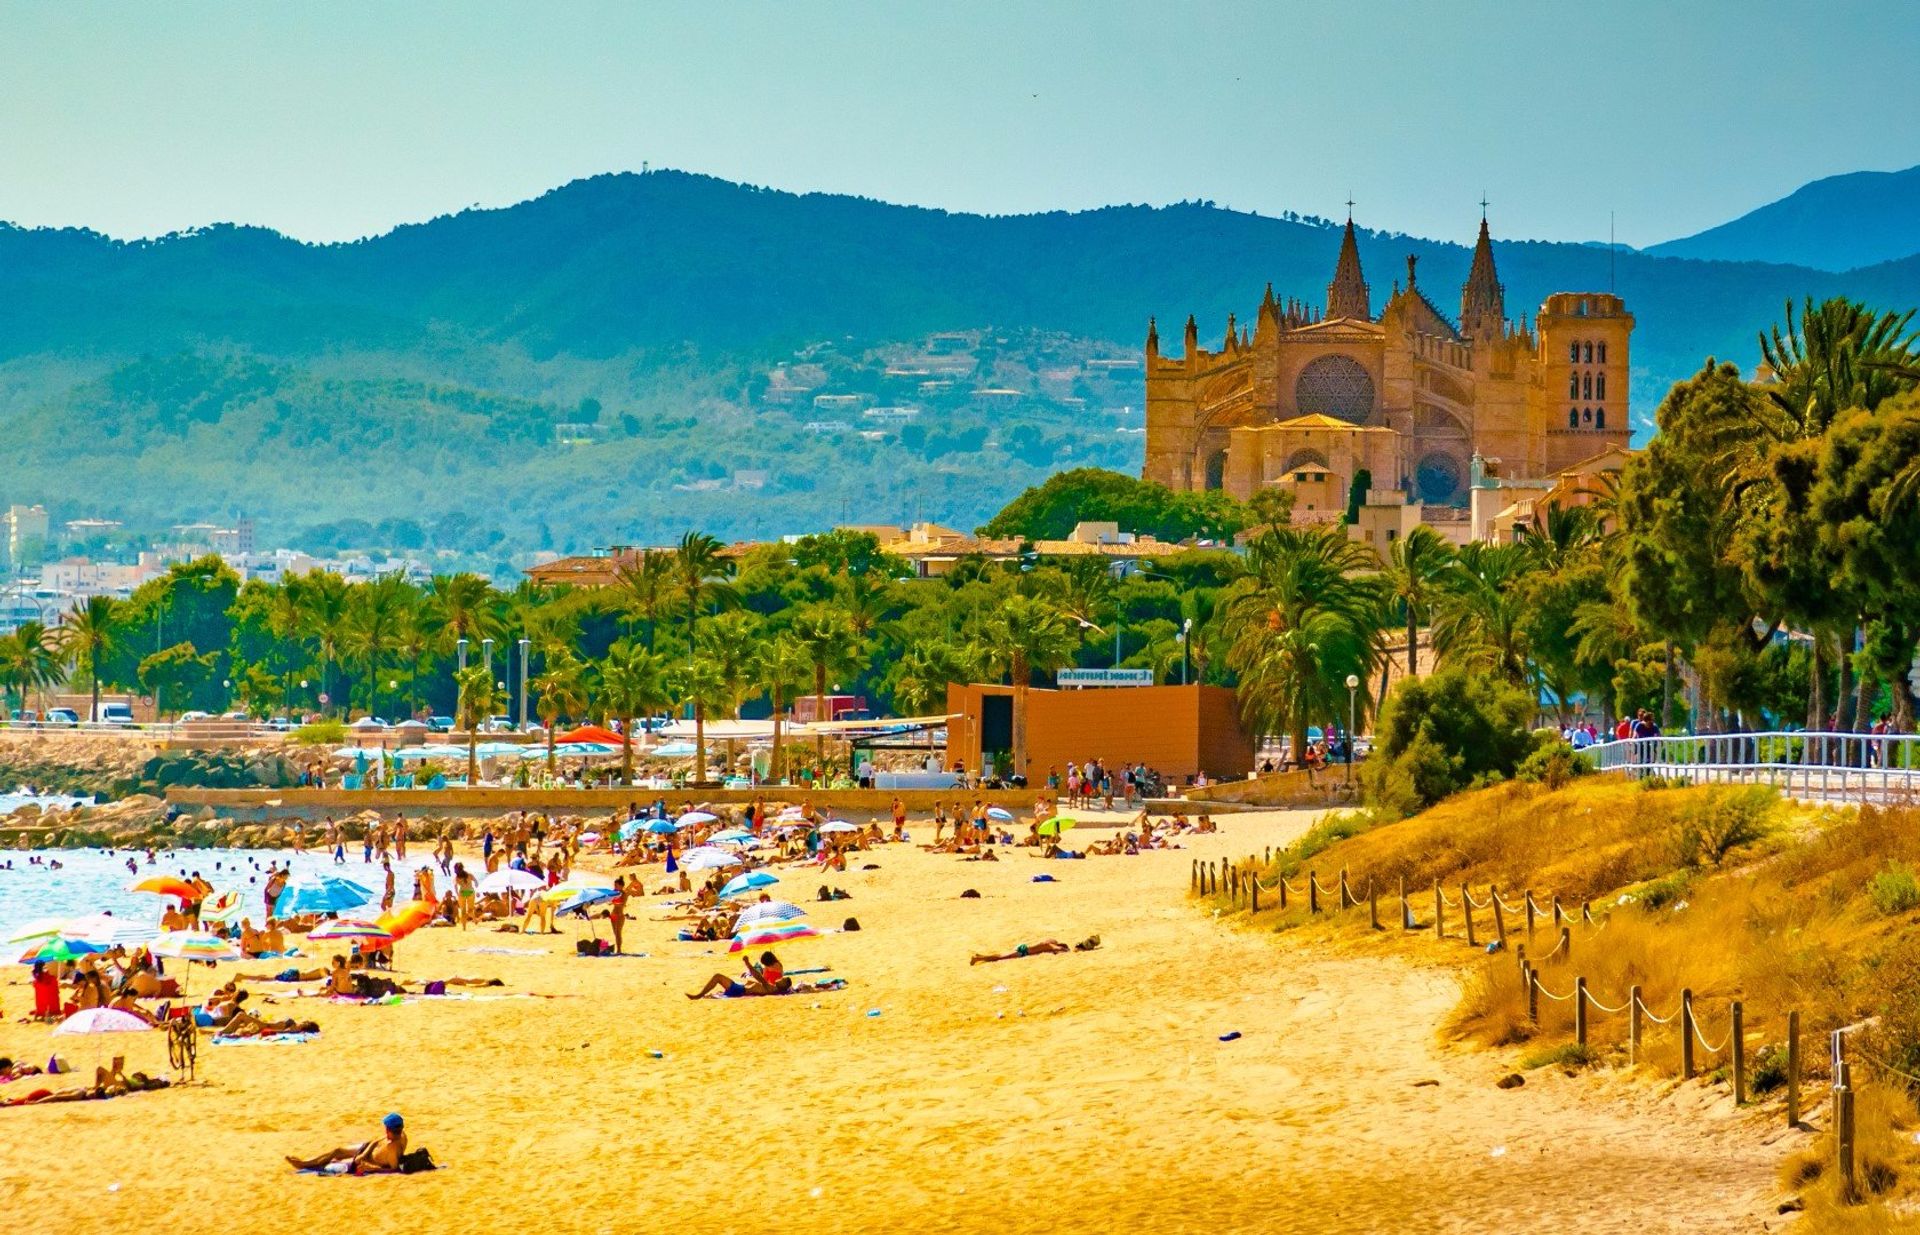 Sand, sea and the beautiful La Seu cathedral in the heart of Palma